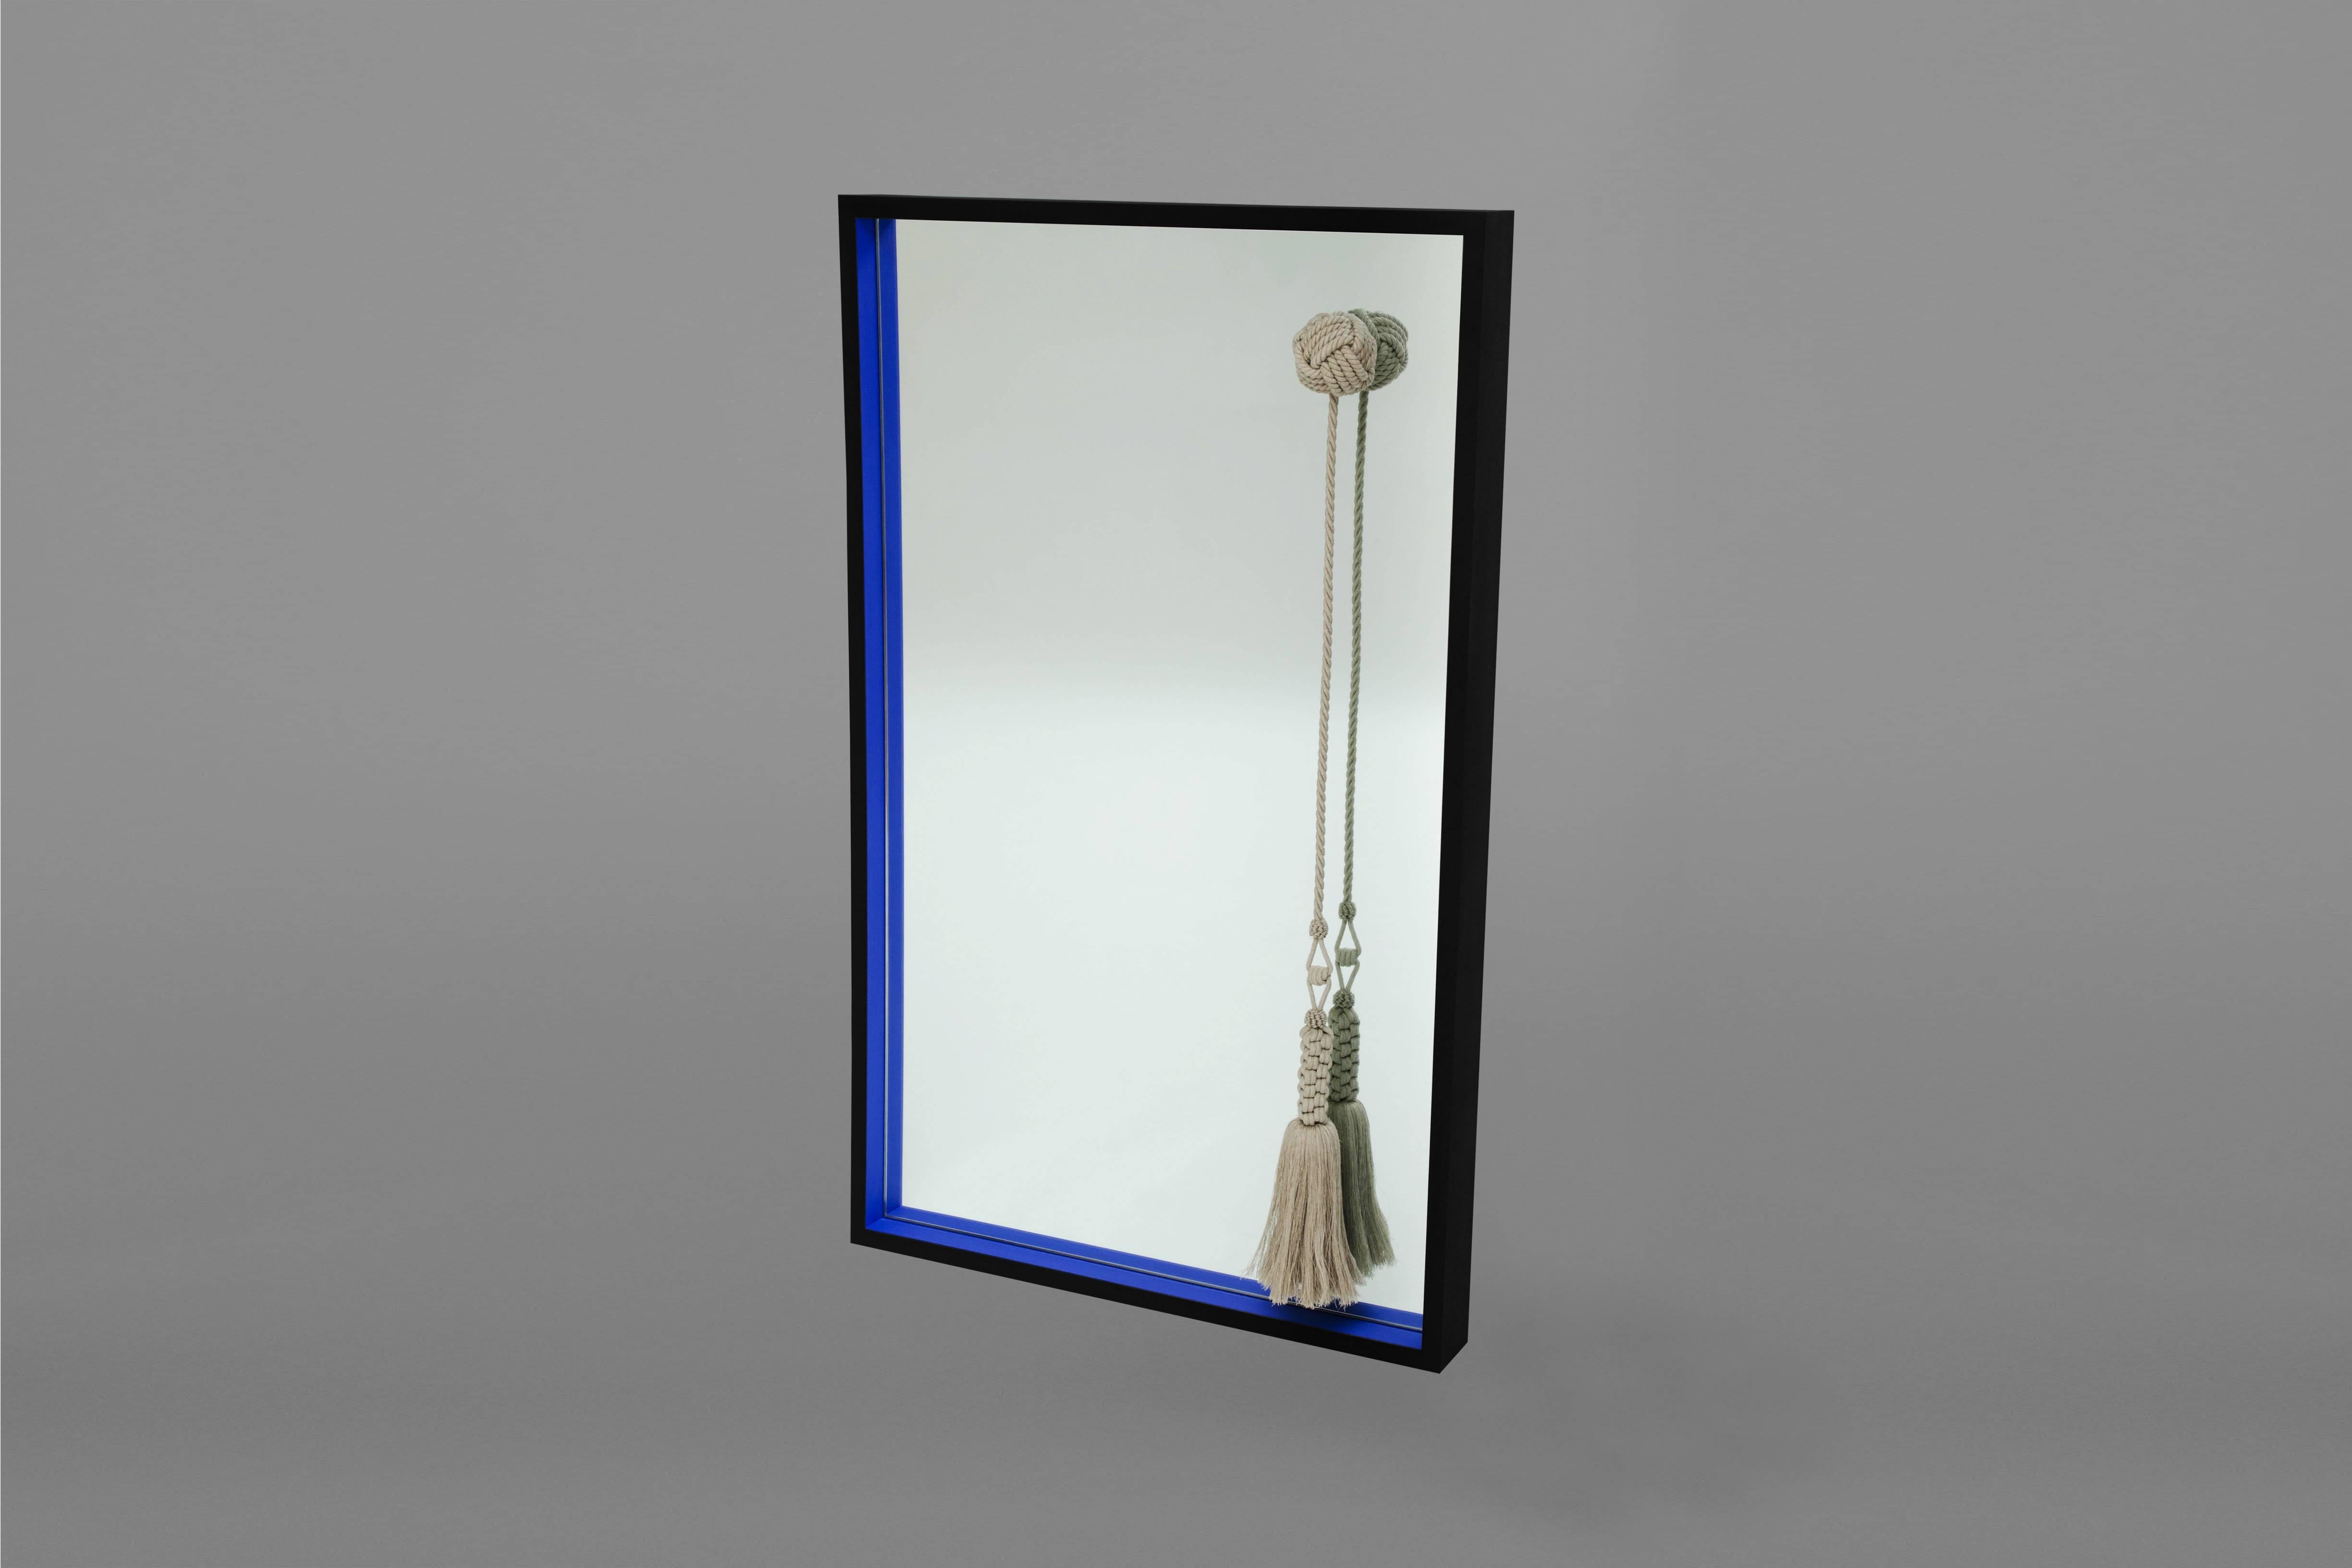 Custom mirror with painted matte finish wood frame (Yves Klein blue and black) with custom linen knot and tassel by Kelly Behun Studio. 
Measures: 33” W x 54” H x 4” D.
Made to order.
Lead time 12-14 weeks.
Custom sizes and paint finishes available